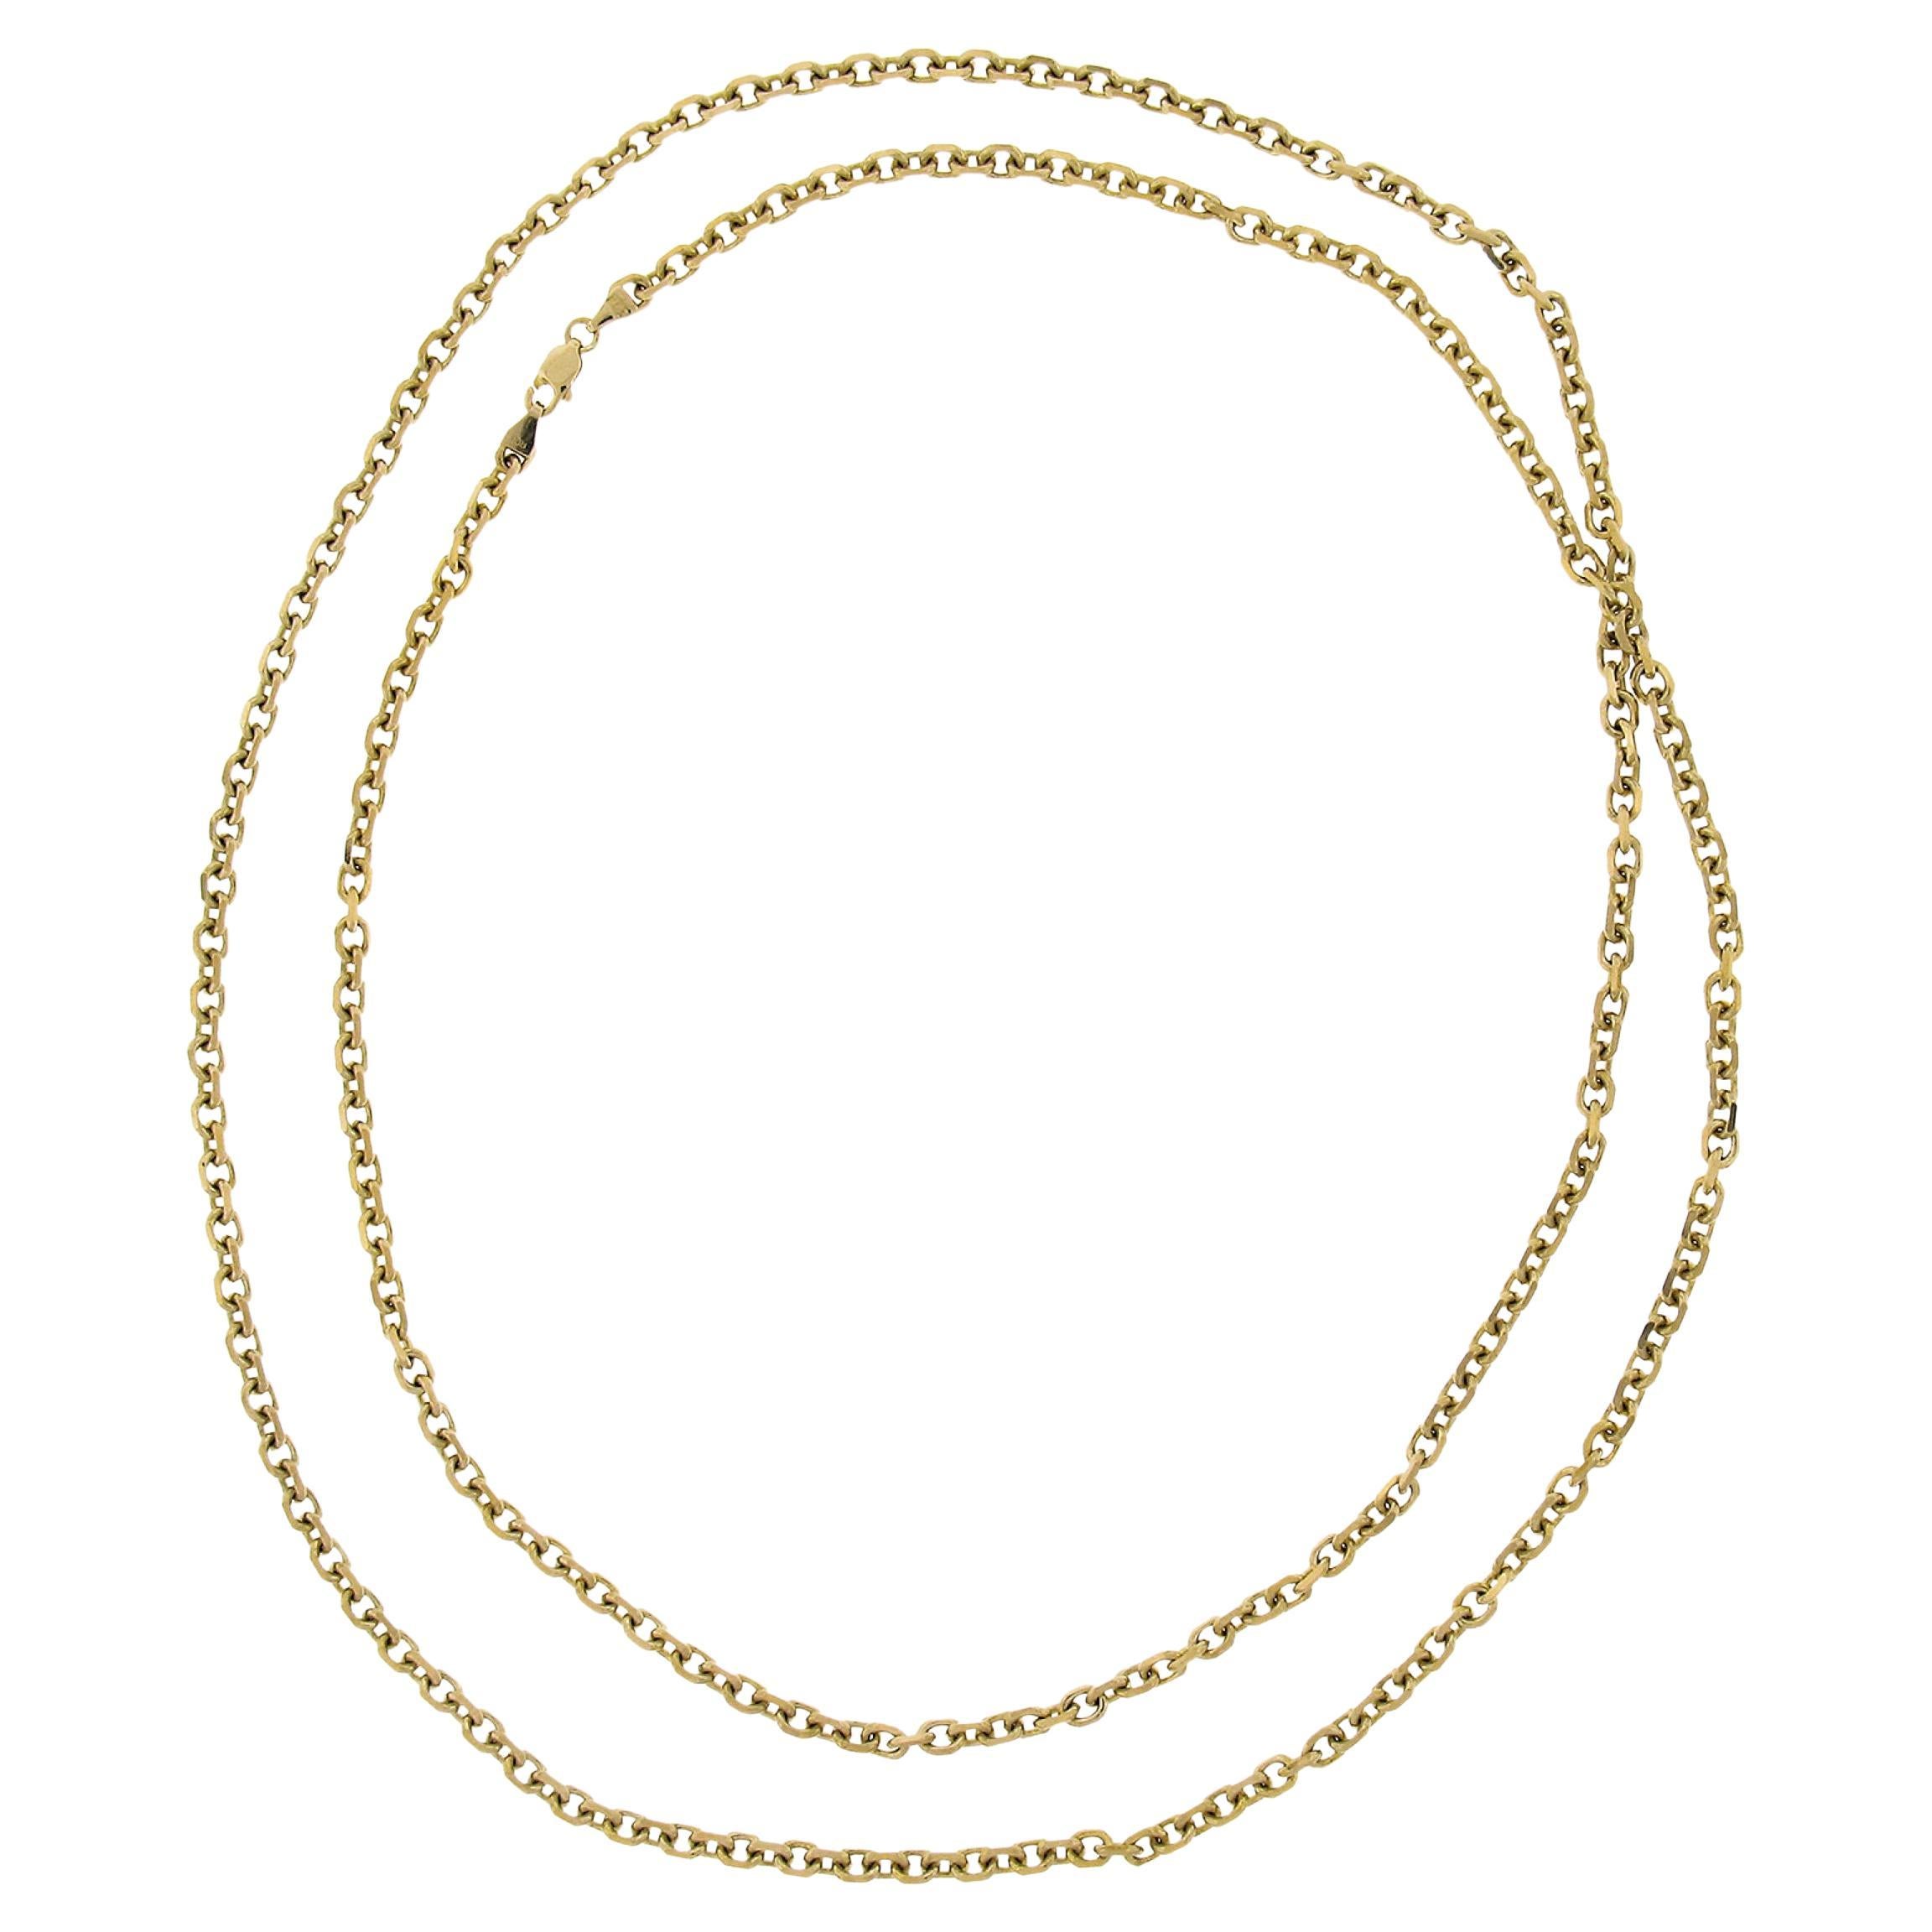 Solid 14K Yellow Gold Long 36" Beveled Cable Link Chain Necklace For Sale